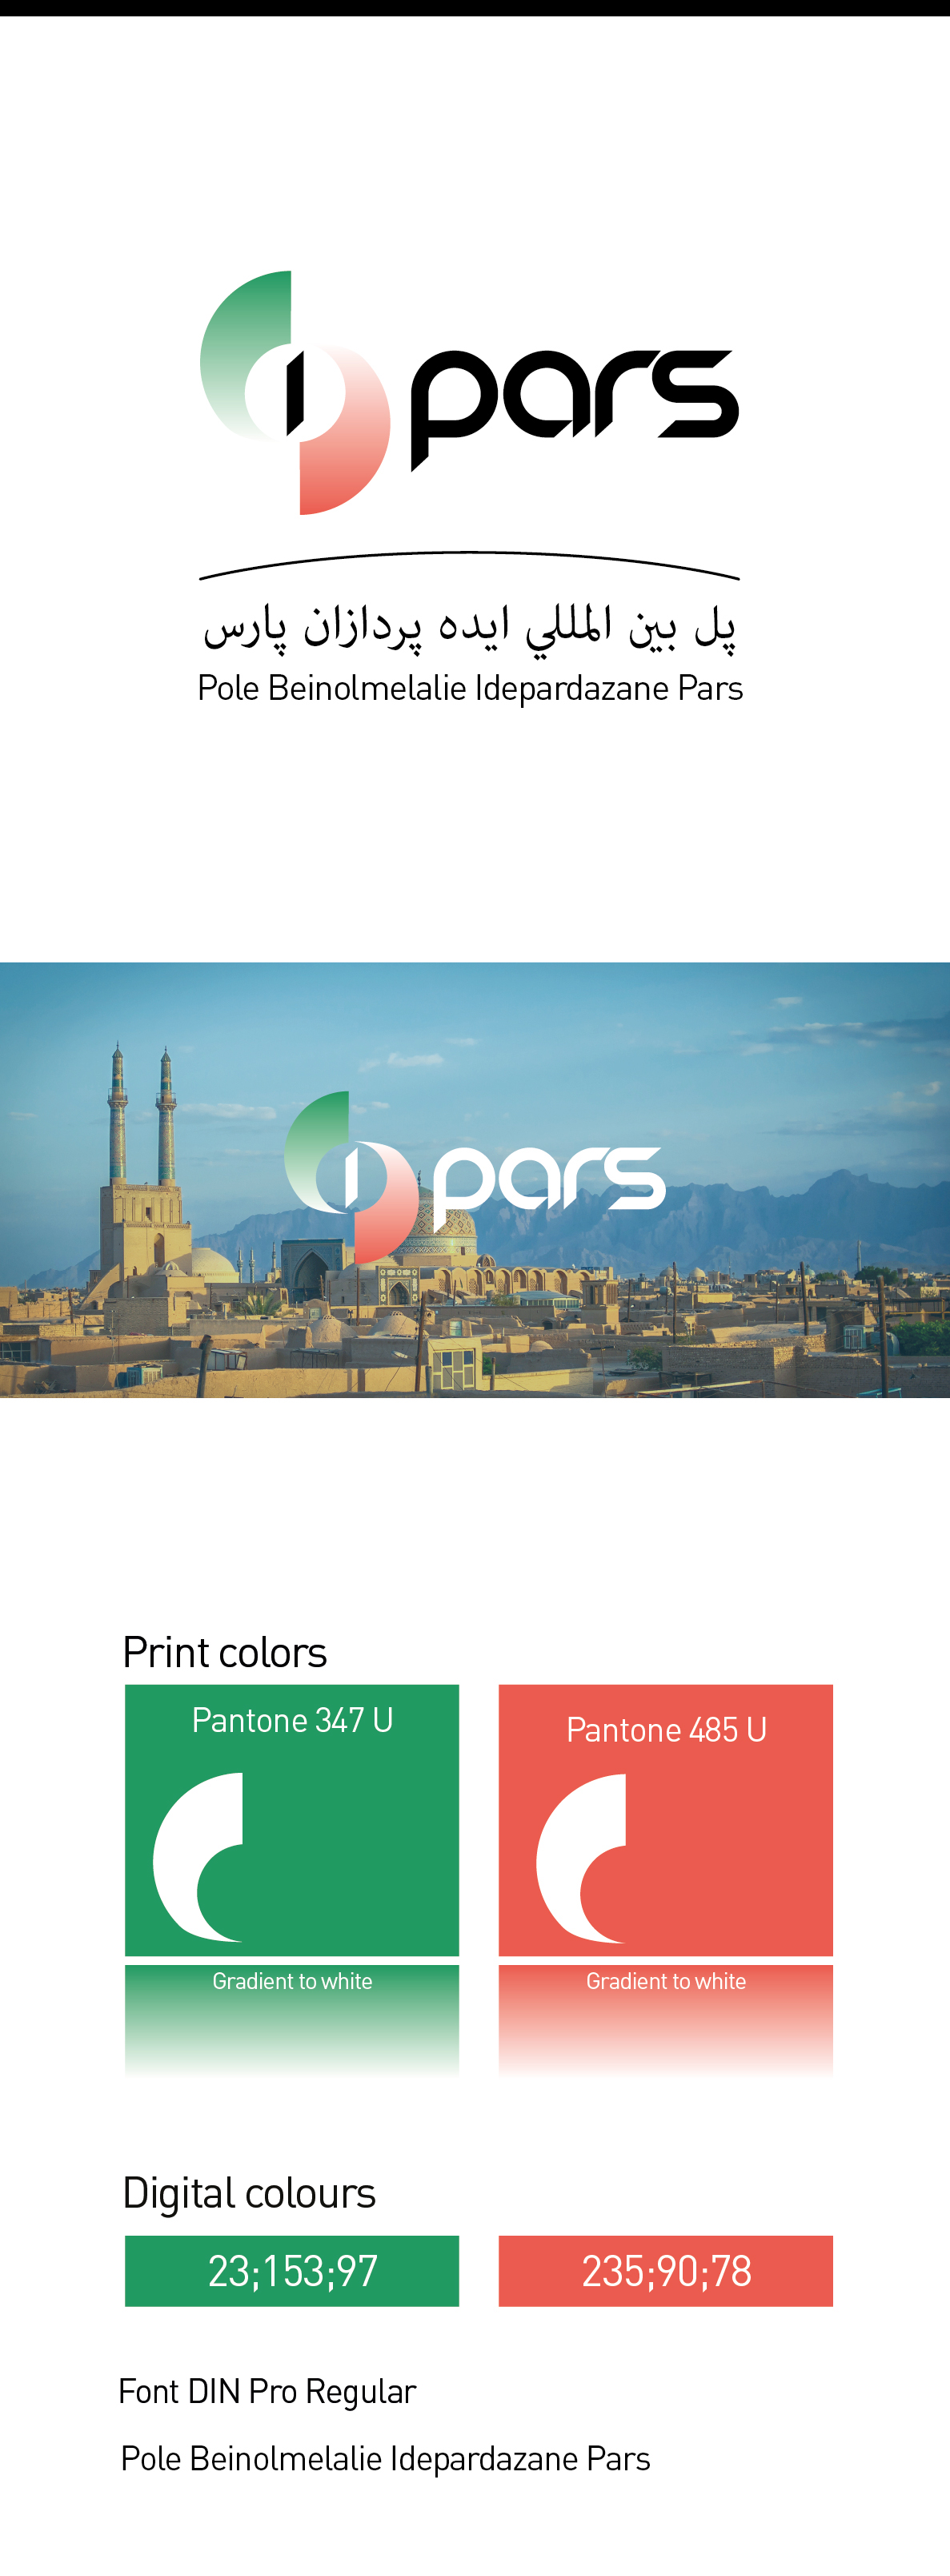 pars Iran Startup Italy business logo companyprofile